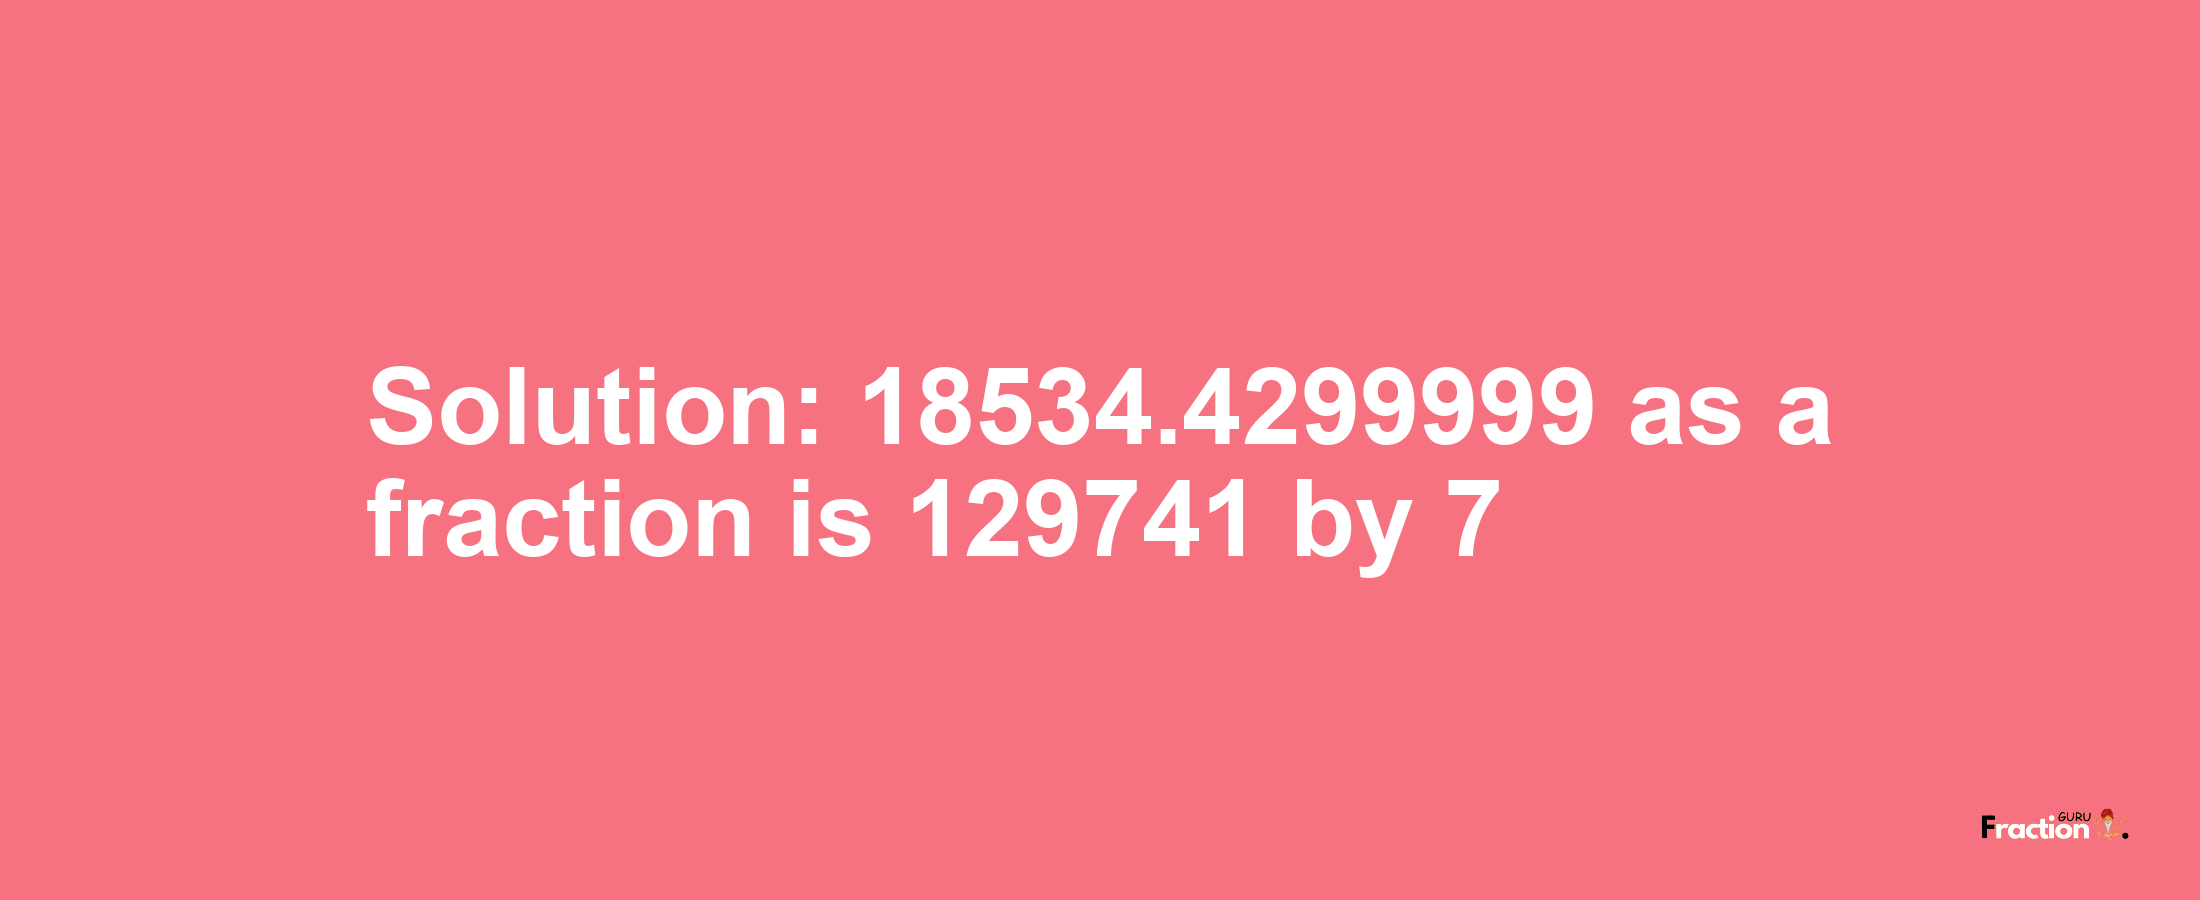 Solution:18534.4299999 as a fraction is 129741/7